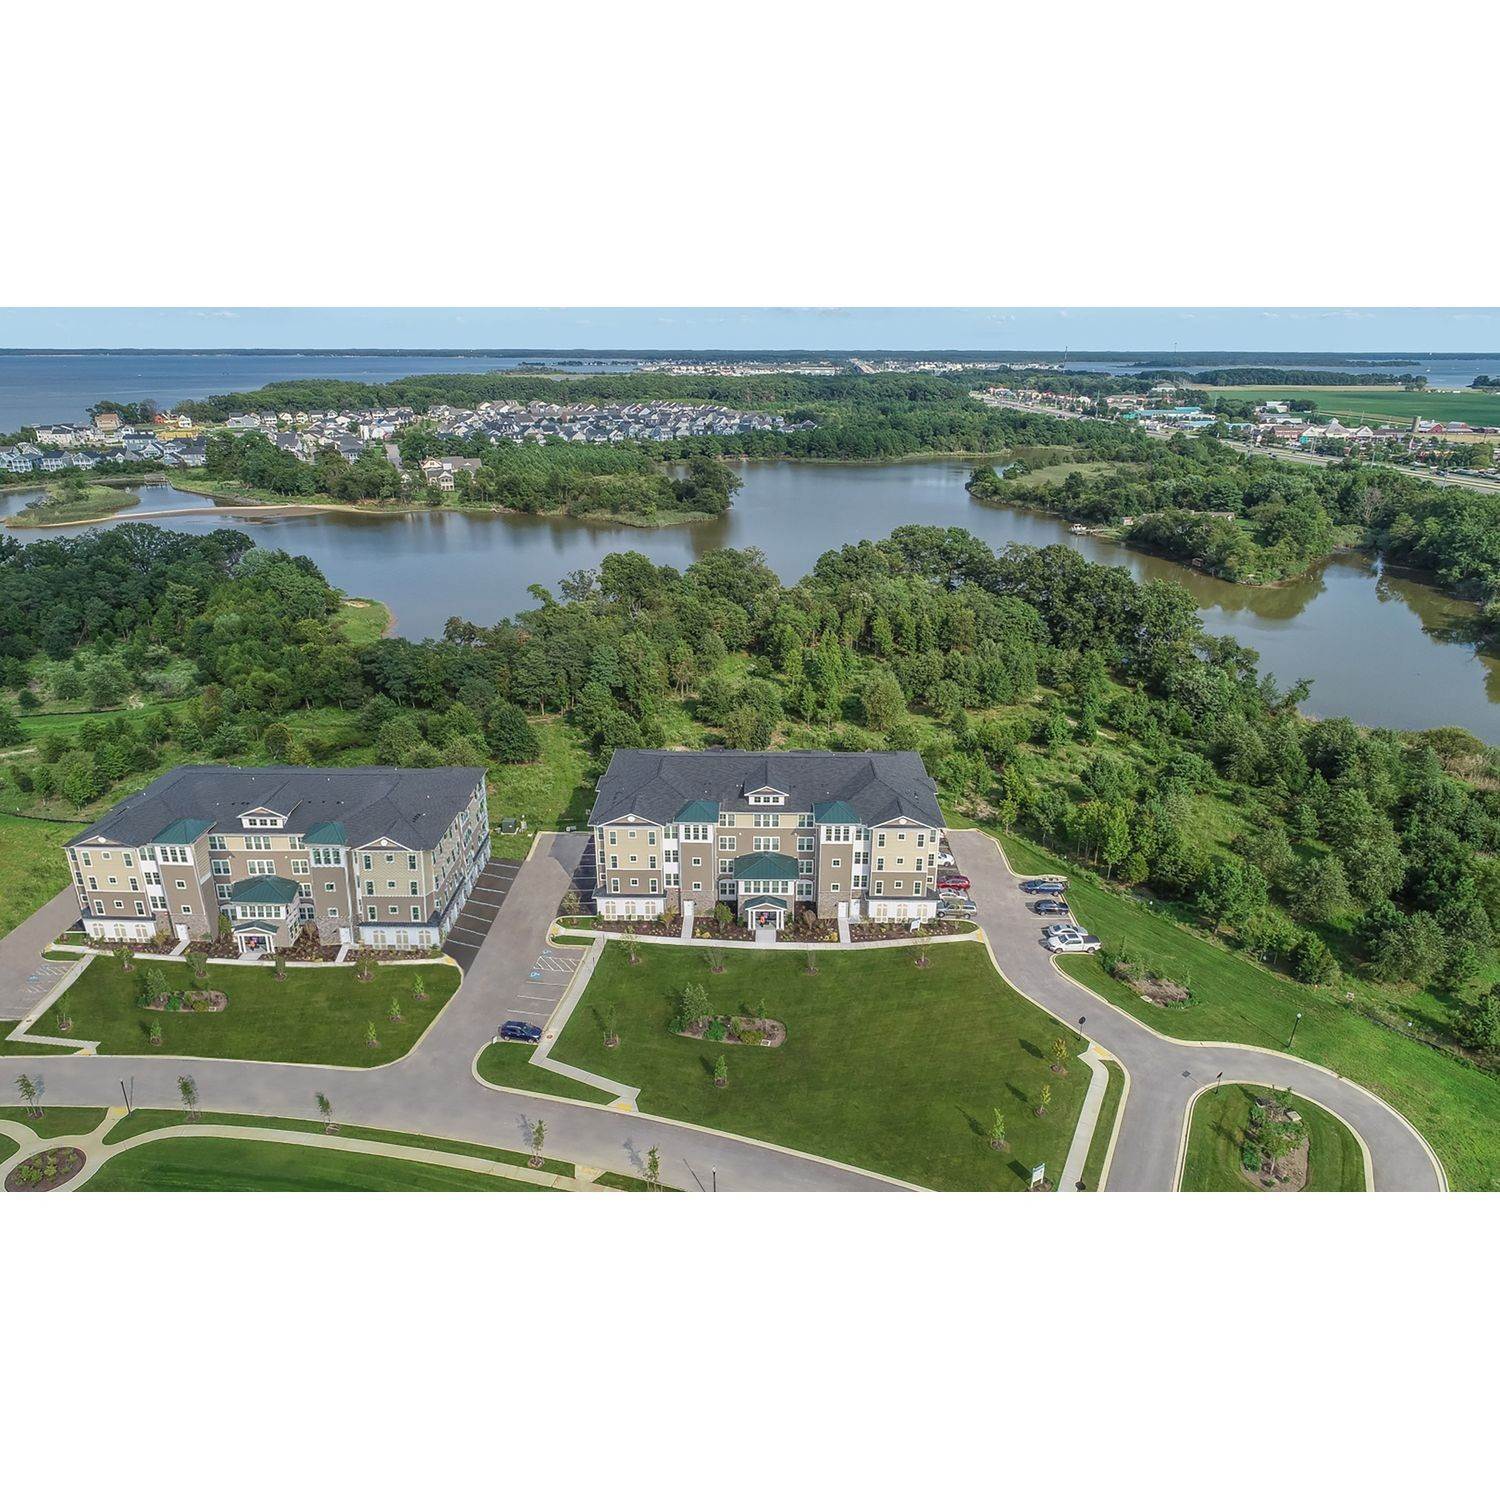 5. 131 Flycatcher Way, Chester, MD 21619에 K. Hovnanian’s® Four Seasons at Kent Island - Luxury Condos 건물